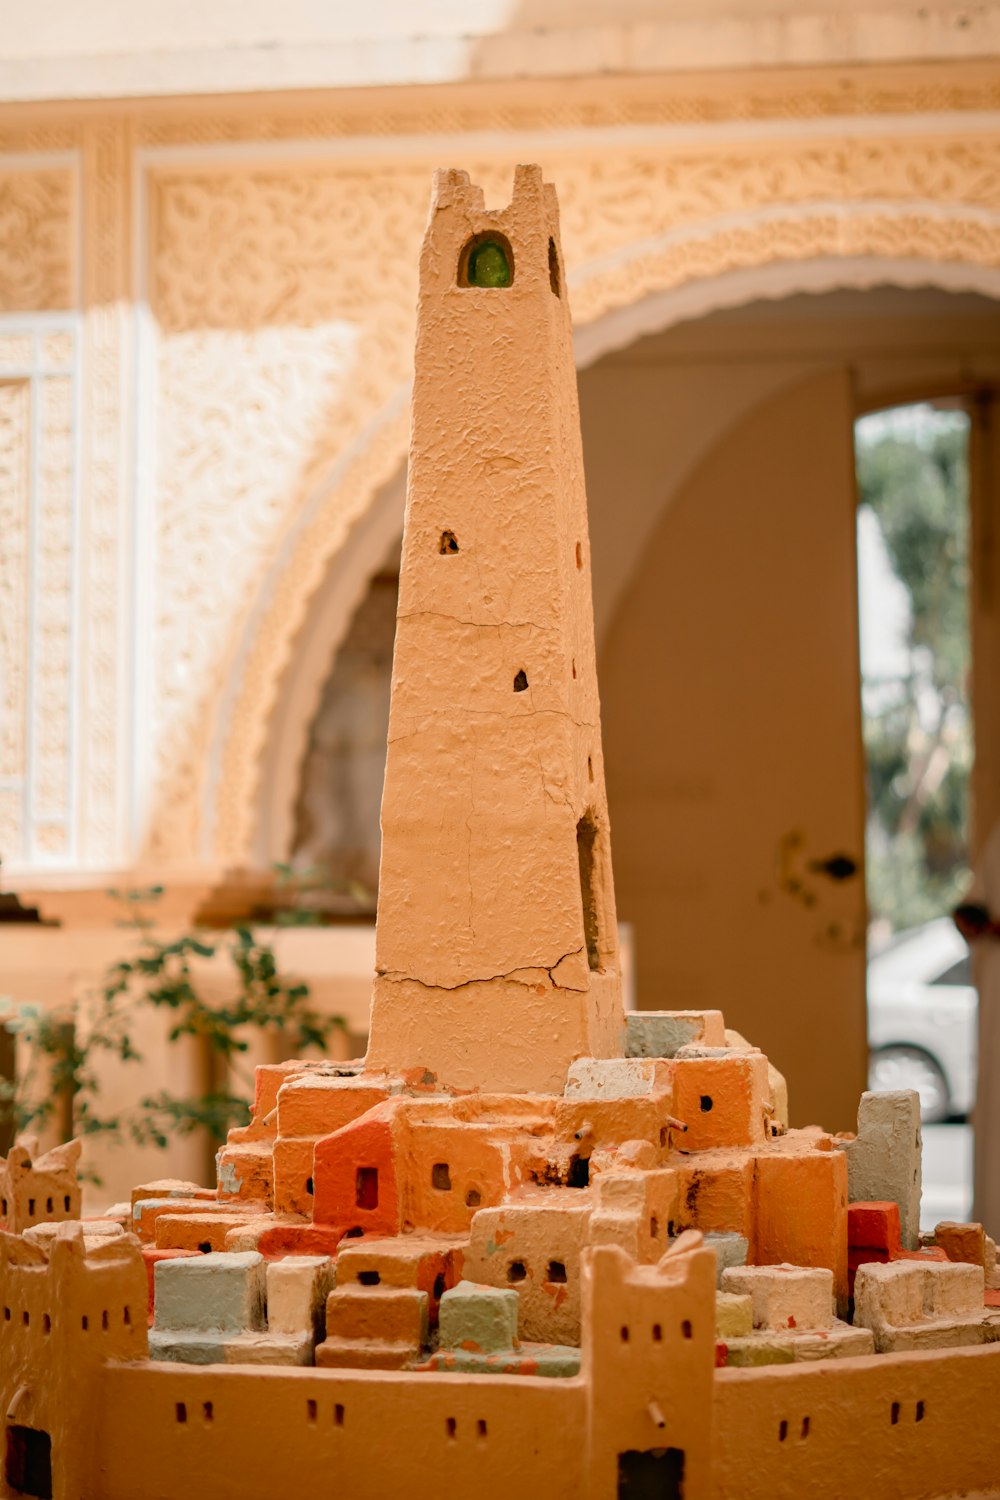 a model of a tower made of clay